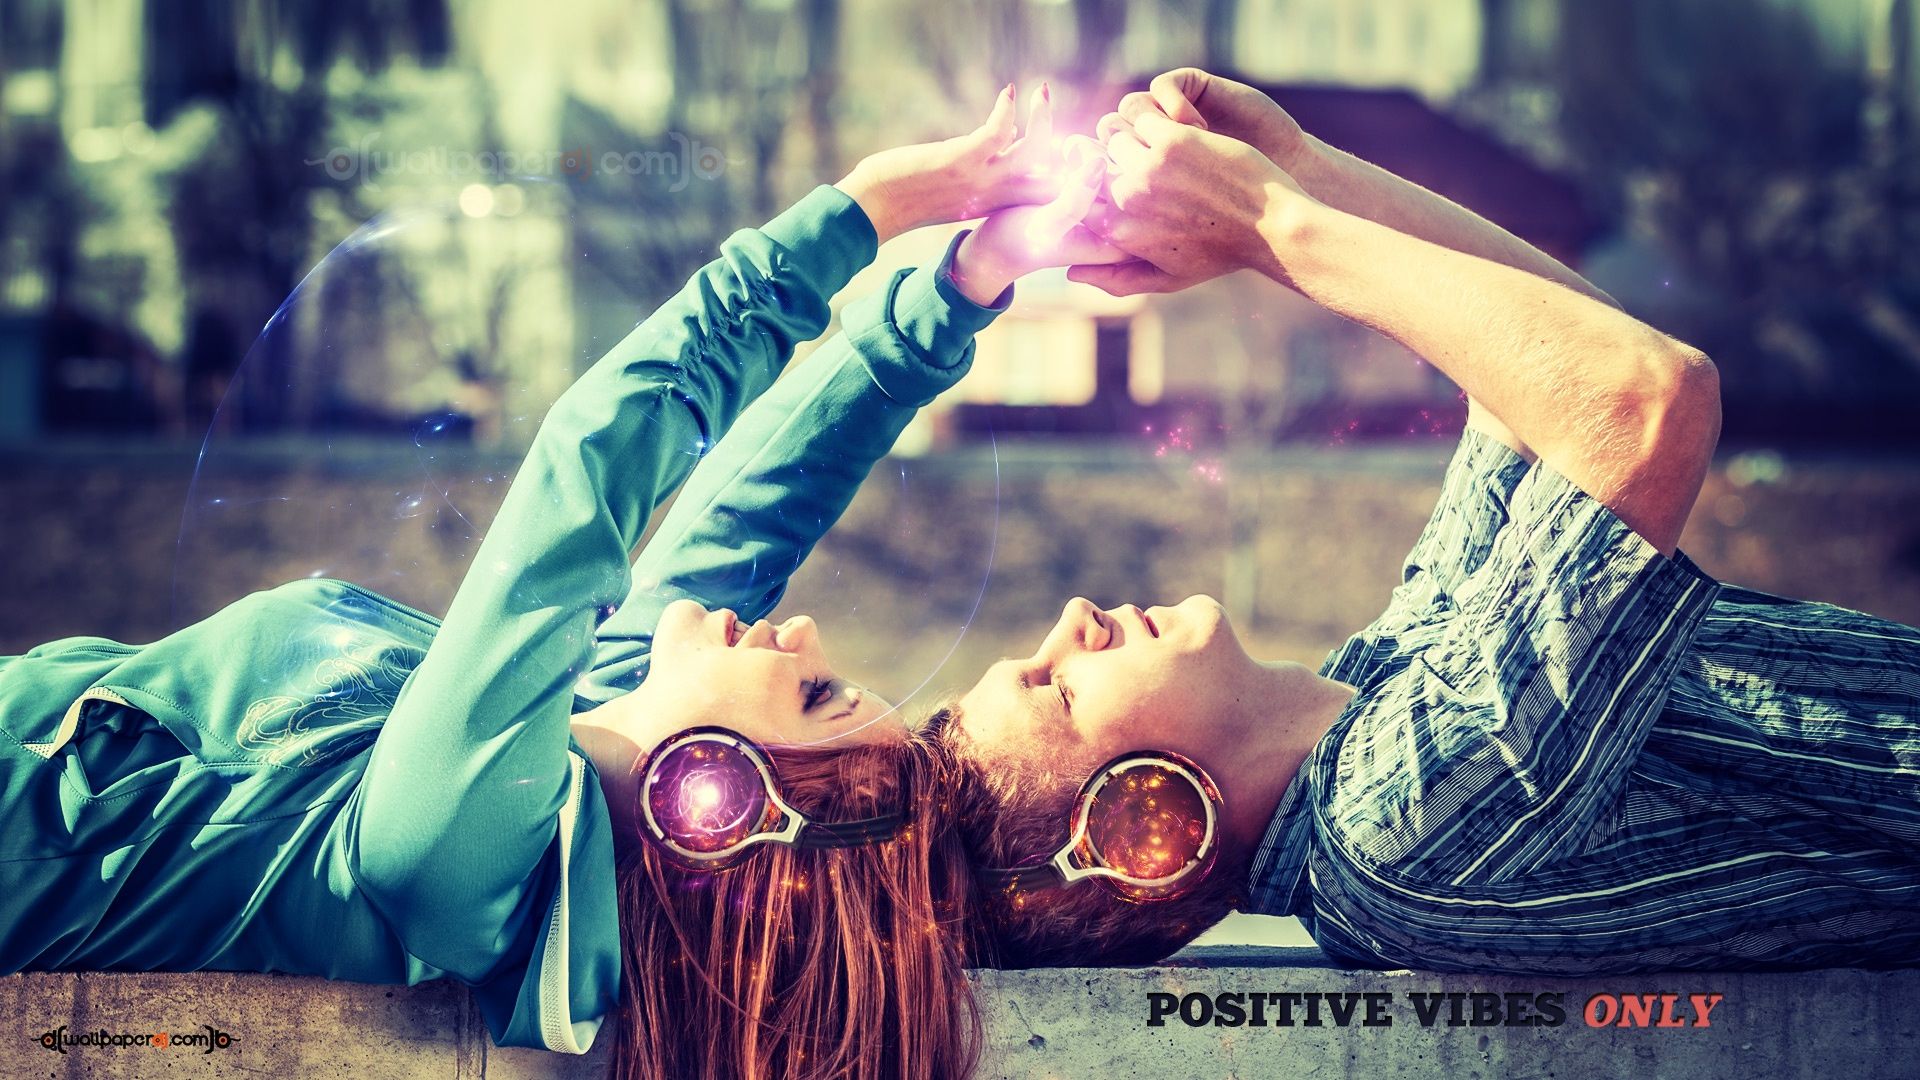 Positive Vibes Only wallpaper, music and dance wallpaper